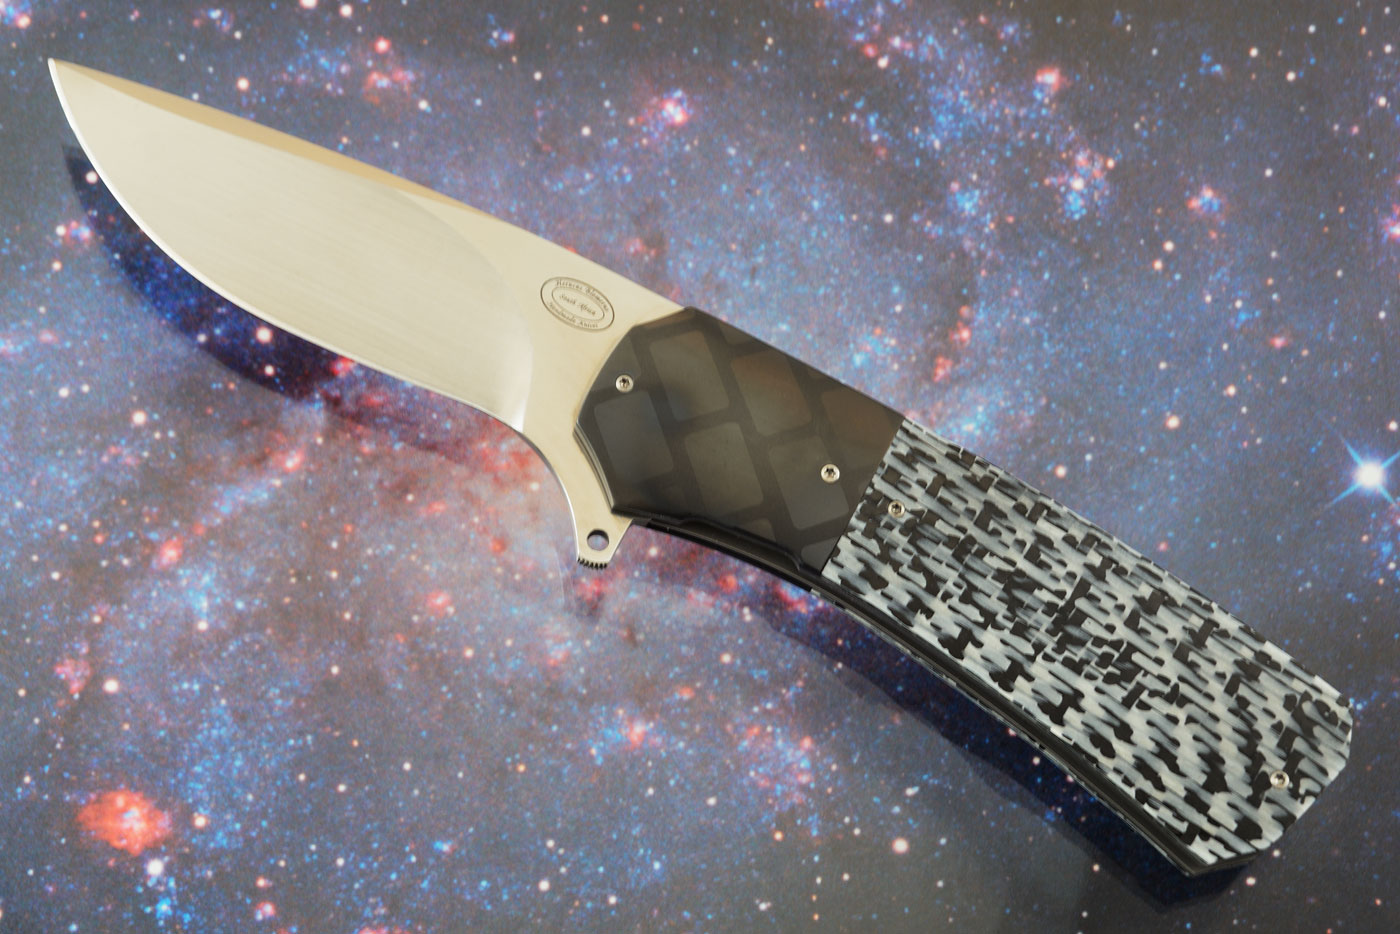 LL15 Flipper with Black and White Carbon Fiber and Zirconium (Ceramic IKBS)